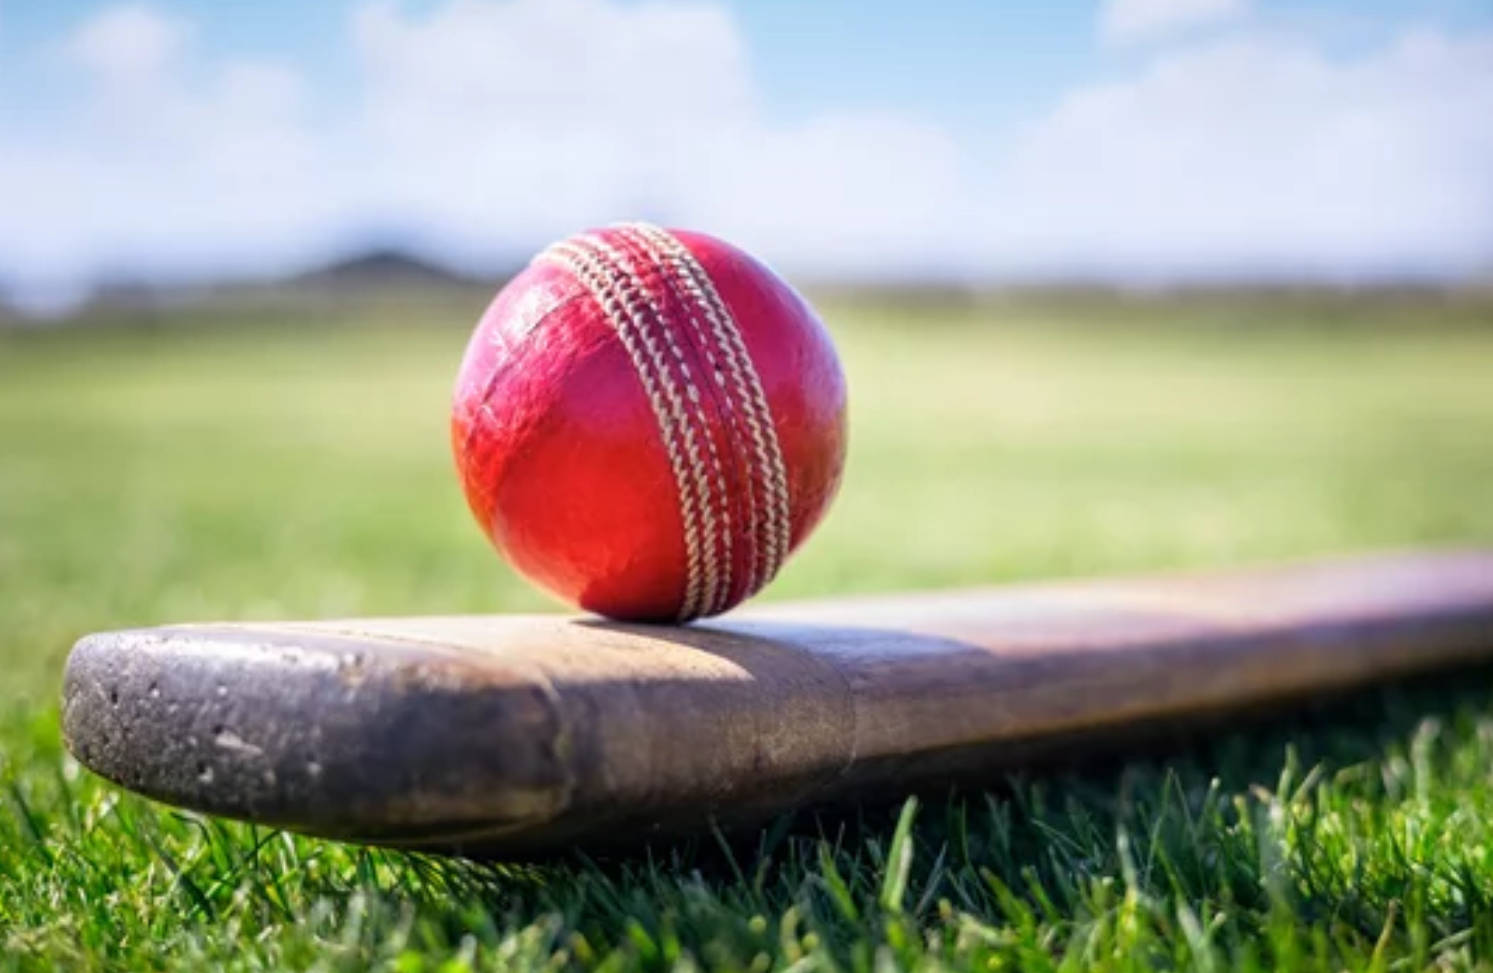 Cricket Ball Pictures  Download Free Images on Unsplash